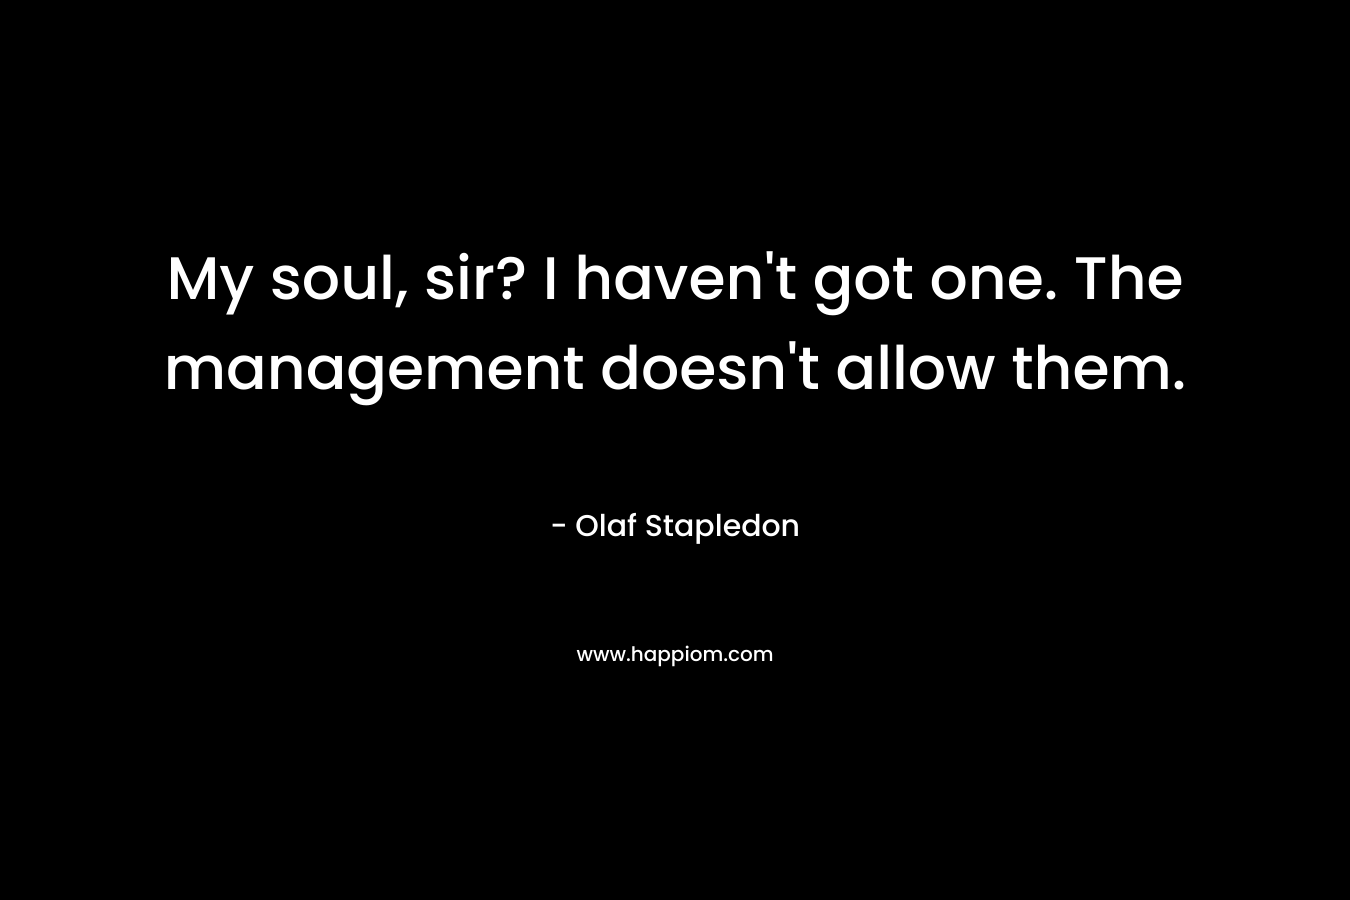 My soul, sir? I haven't got one. The management doesn't allow them.